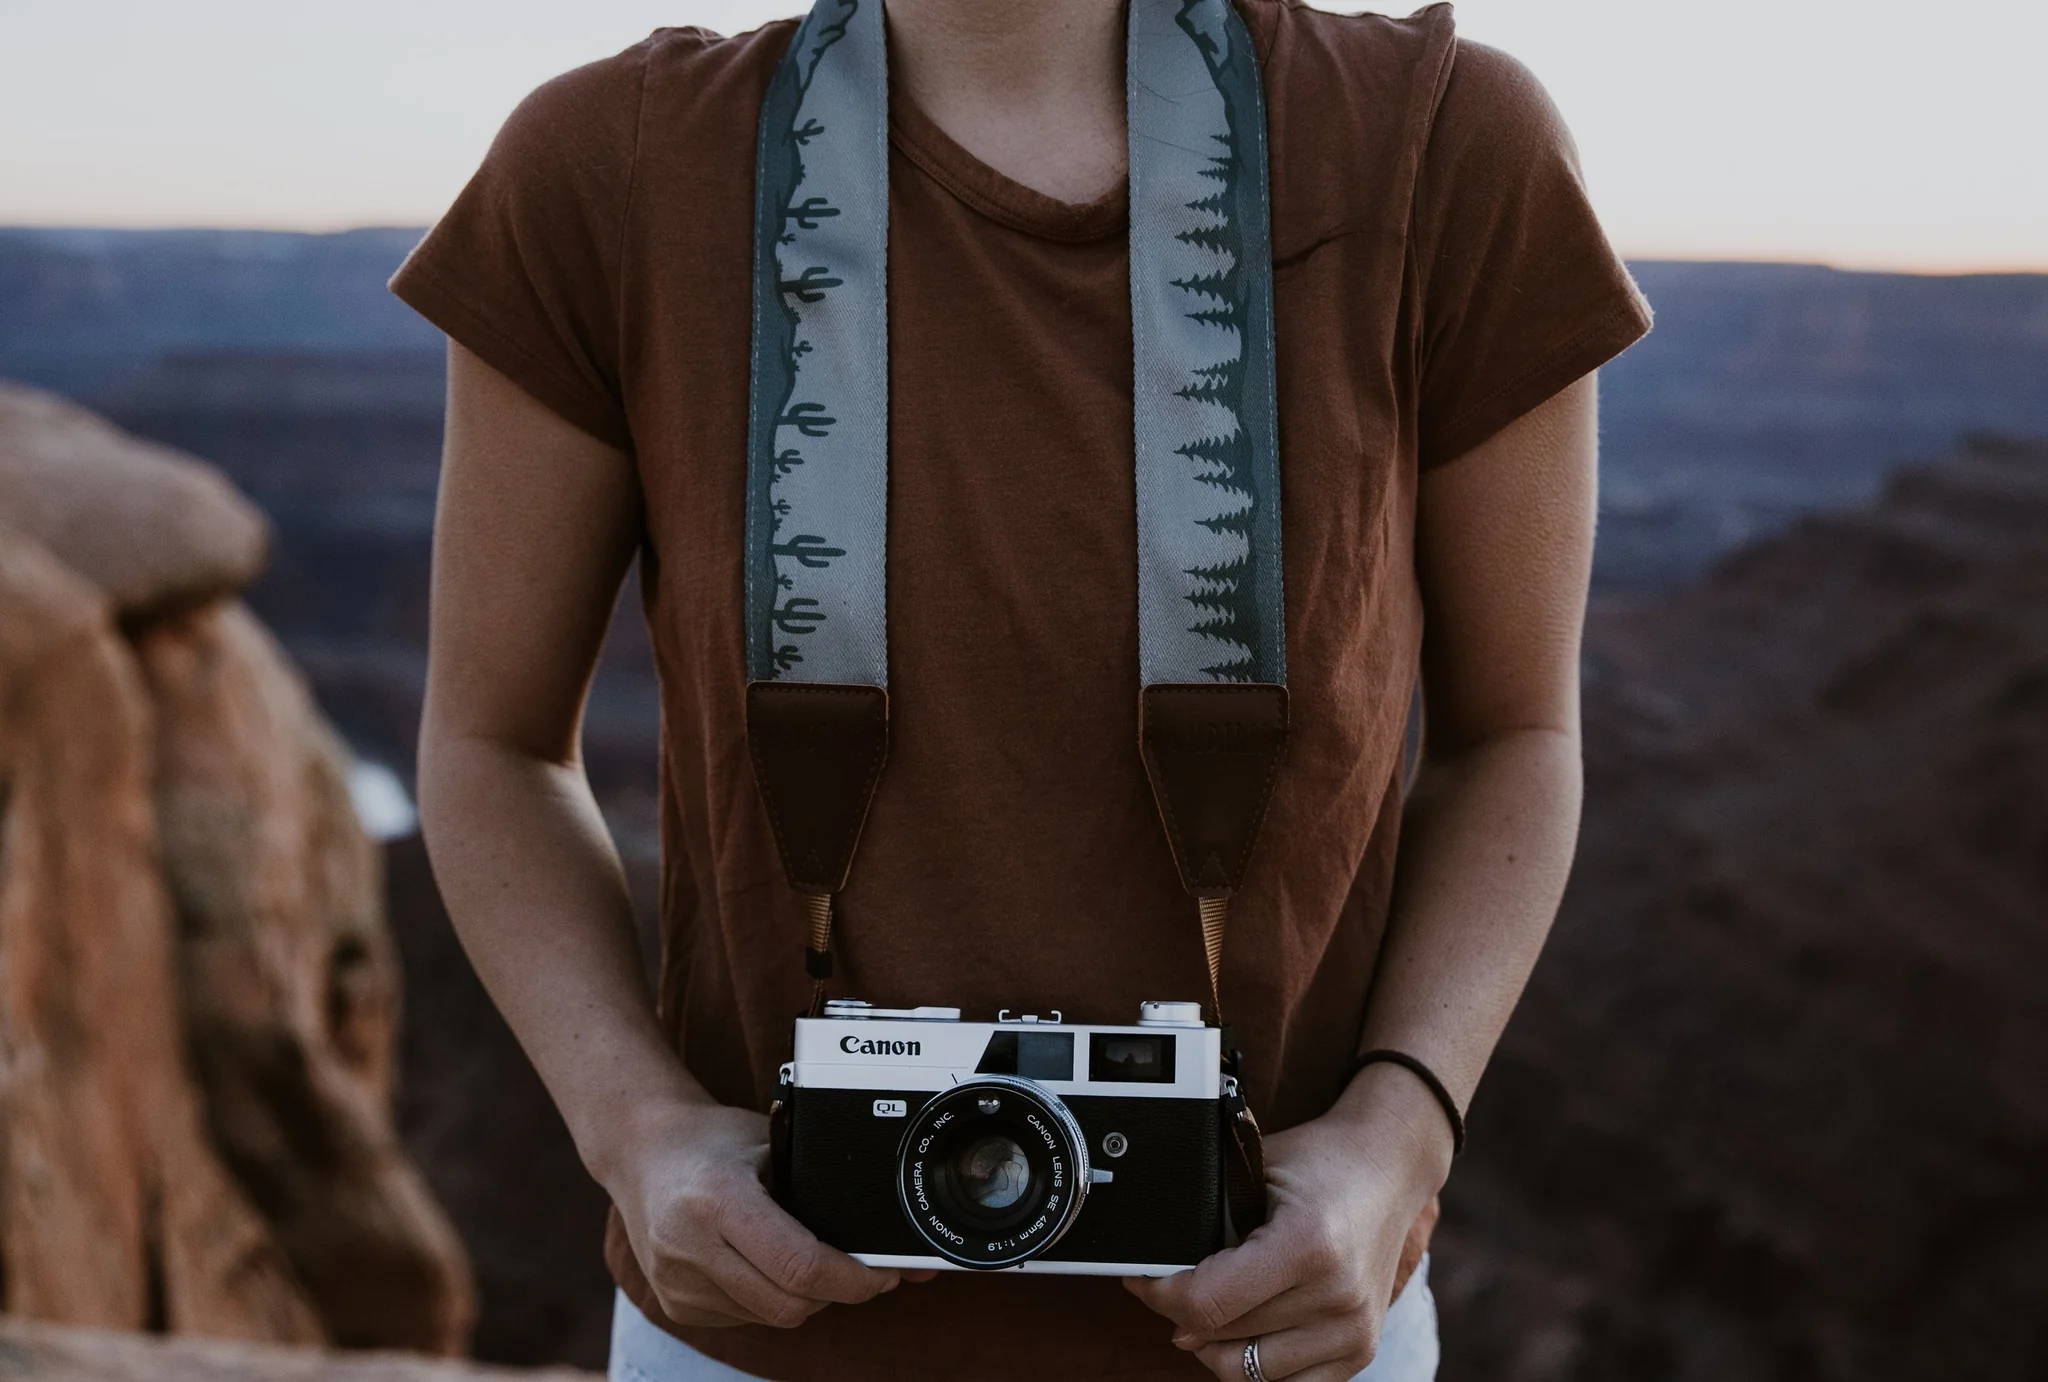 Woman holding a camera and wearing a camera neck strap in front of nature background.